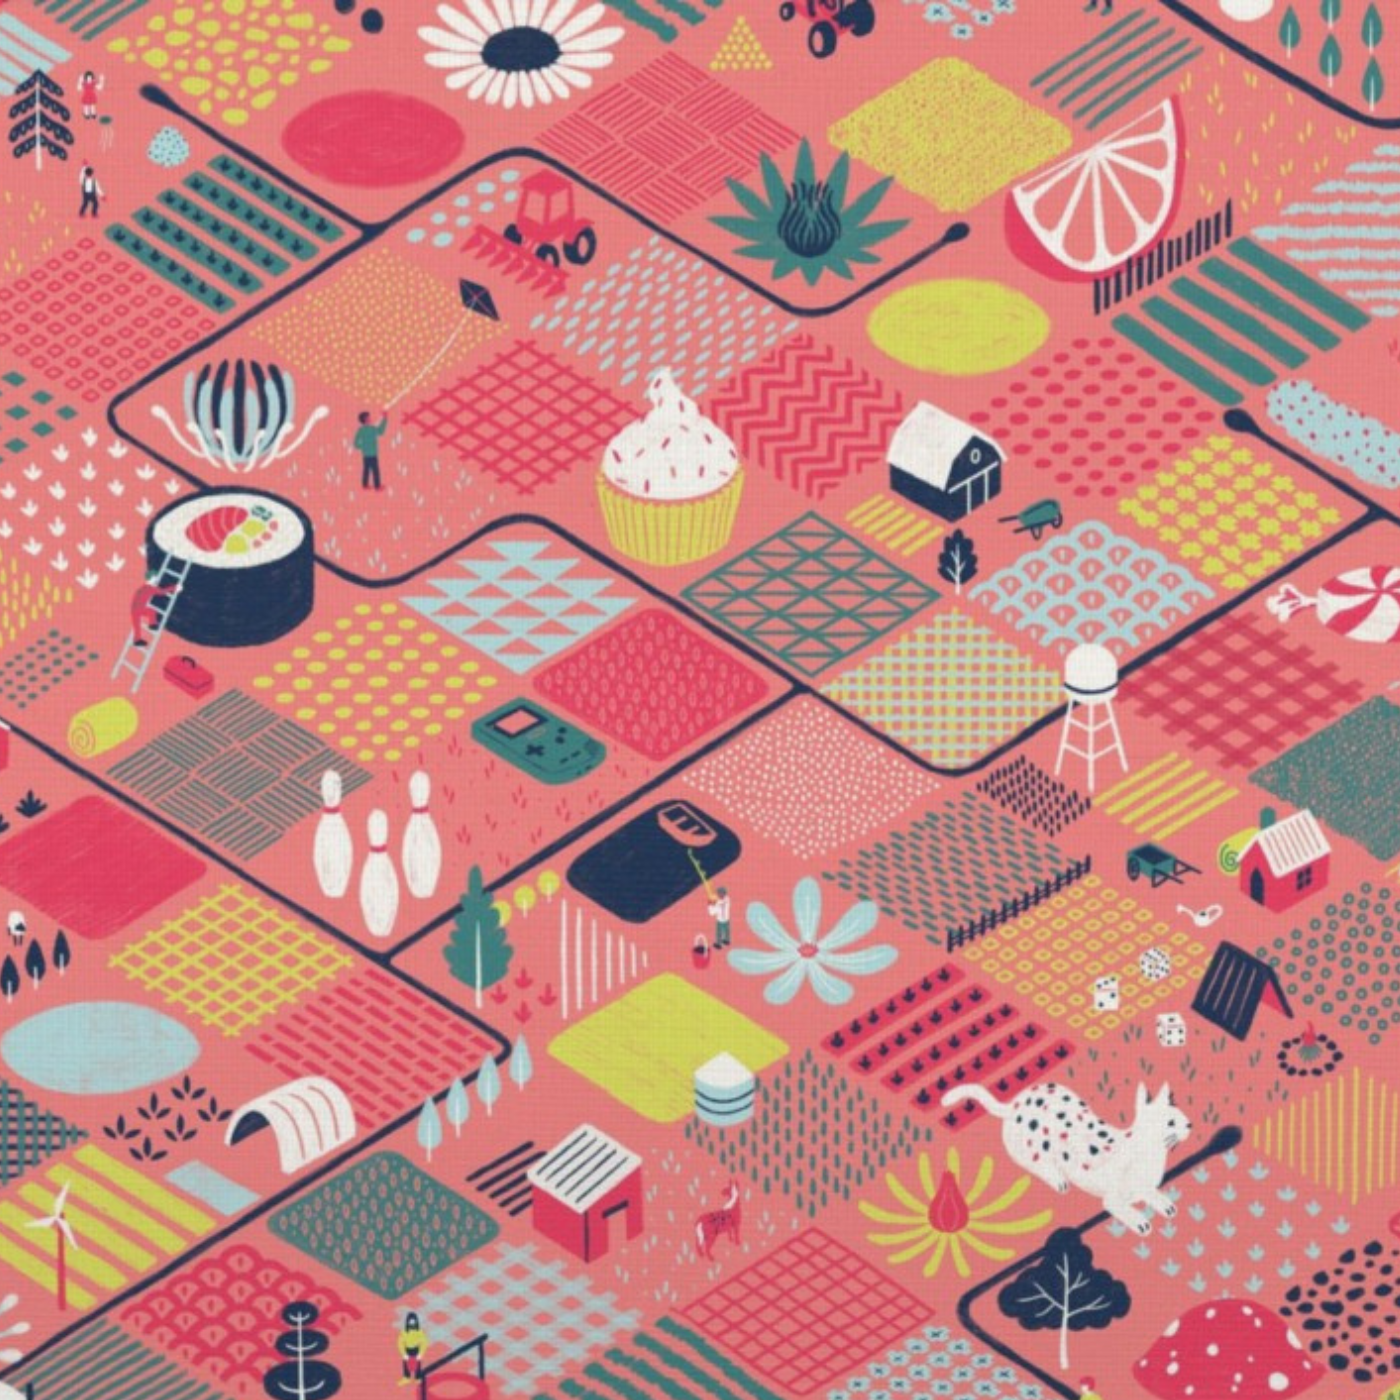 A design with a pink background featuring small square patchwork pieces in hot pink, light blue, yellow, green and more, as if on a quilted land. Some patches are striped, some have geometric shapes, some look as if made of tiny small bricks. Dotted throughout are small red farmhouses, water towers and people doing everyday things like flying kites and fishing, but there are also large cats, bowling pins, giant flowers a cupcake with white icing, and an orange slice.